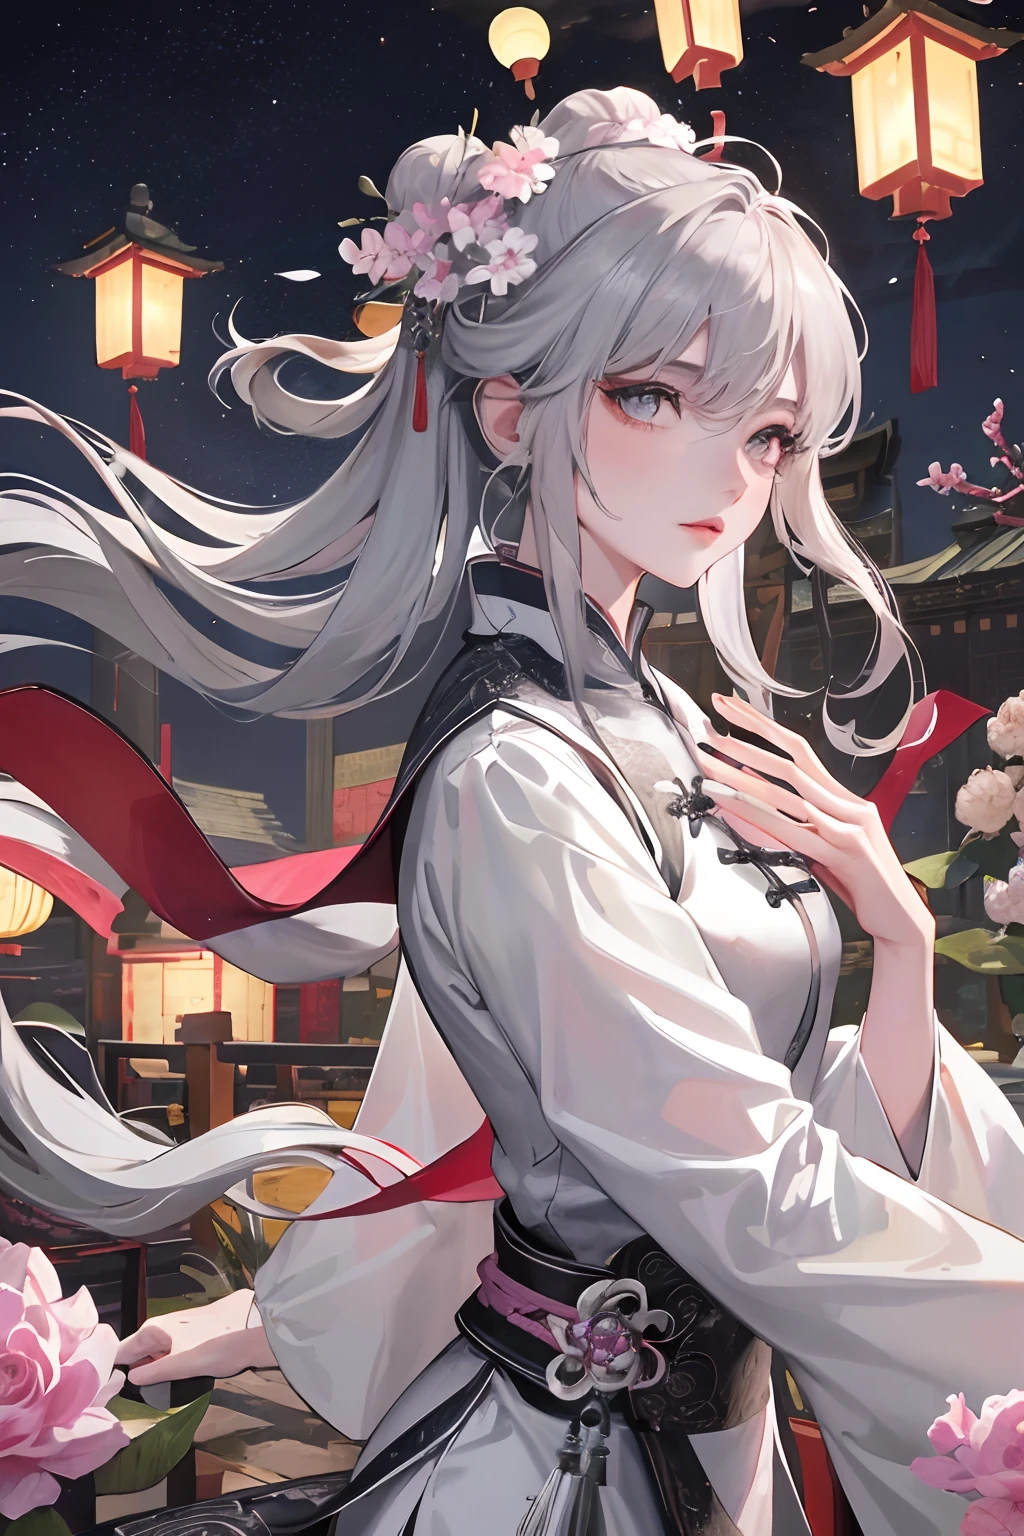 Masterpiece, Best Quality, Night, Full Moon, 1 Girl, Mature Woman, Chinese Style, Ancient China, Sisters, Royal Sisters, Cold Expressions, Faceless, Silver White Long haired Woman, Light Pink Lips, Calm, Intellectual, Three Belts, Gray Pupils, Assassin, Flower Lantern, Carrying Lanterns, Flower Ball Background, Strolling on the Street Landscape